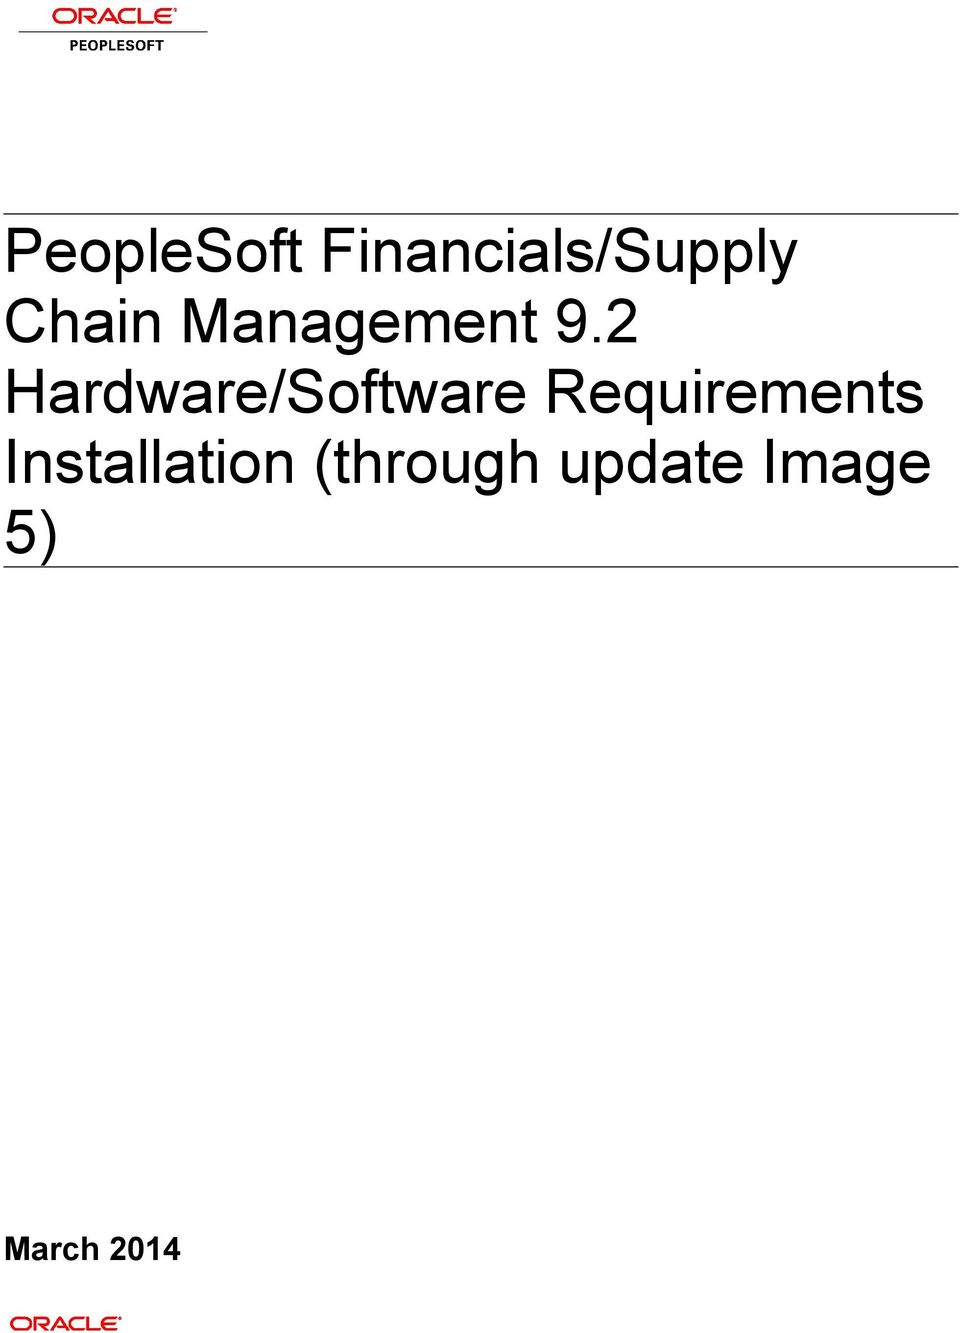 2 Hardware/Software Requirements